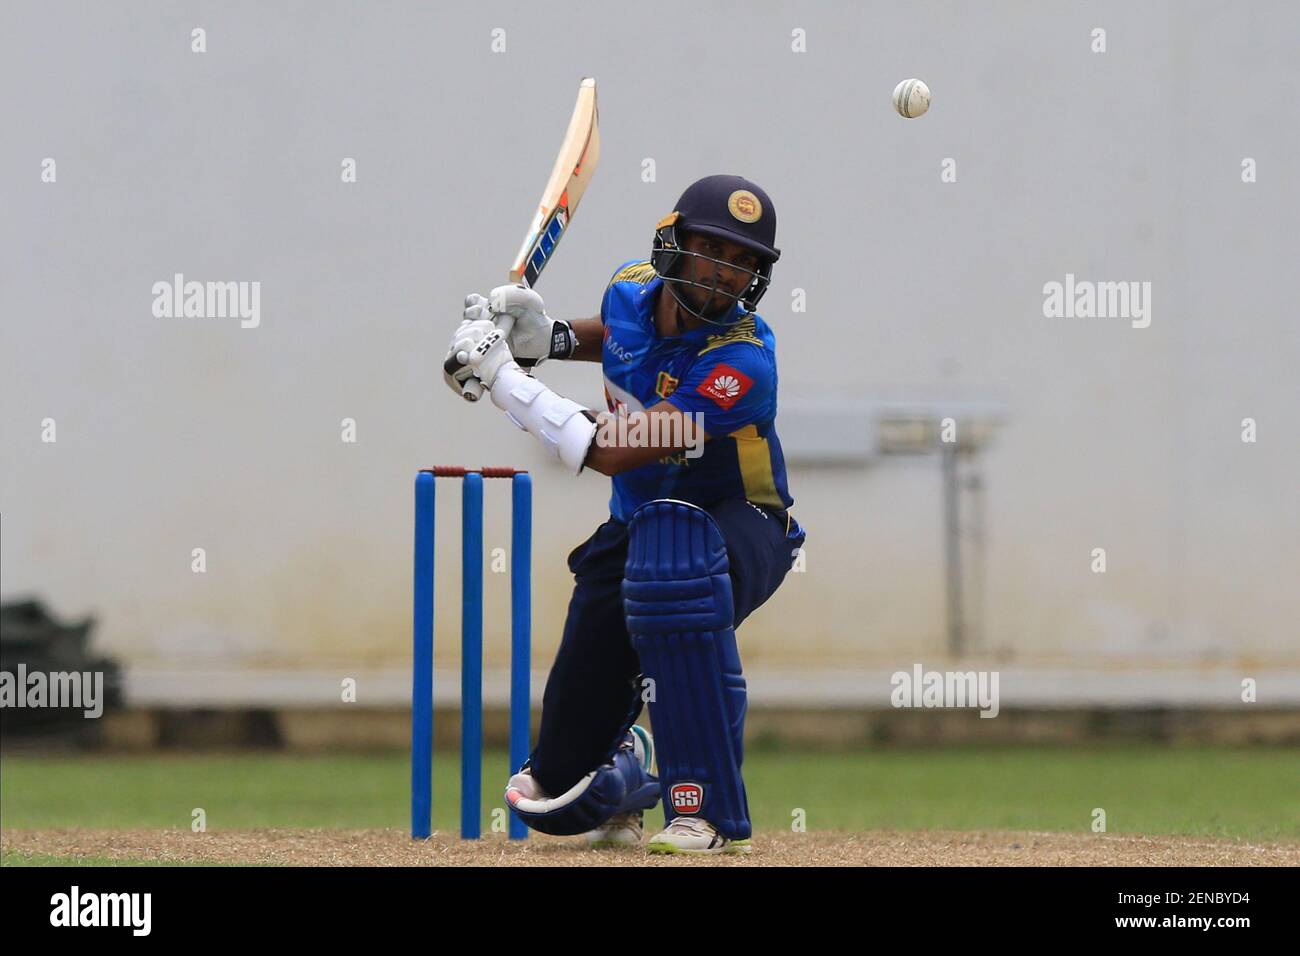 Sri Lankan cricketer Dasun Shanaka watches the ball as he plays a shot during the tour match between Sri Lanka Board President's XI and Bangladesh at P Sara oval international cricket ground, Colombo, Sri Lanka. Tuesday 23 July 2019. (Photo by Invent Pictures/Sipa USA)  Stock Photo